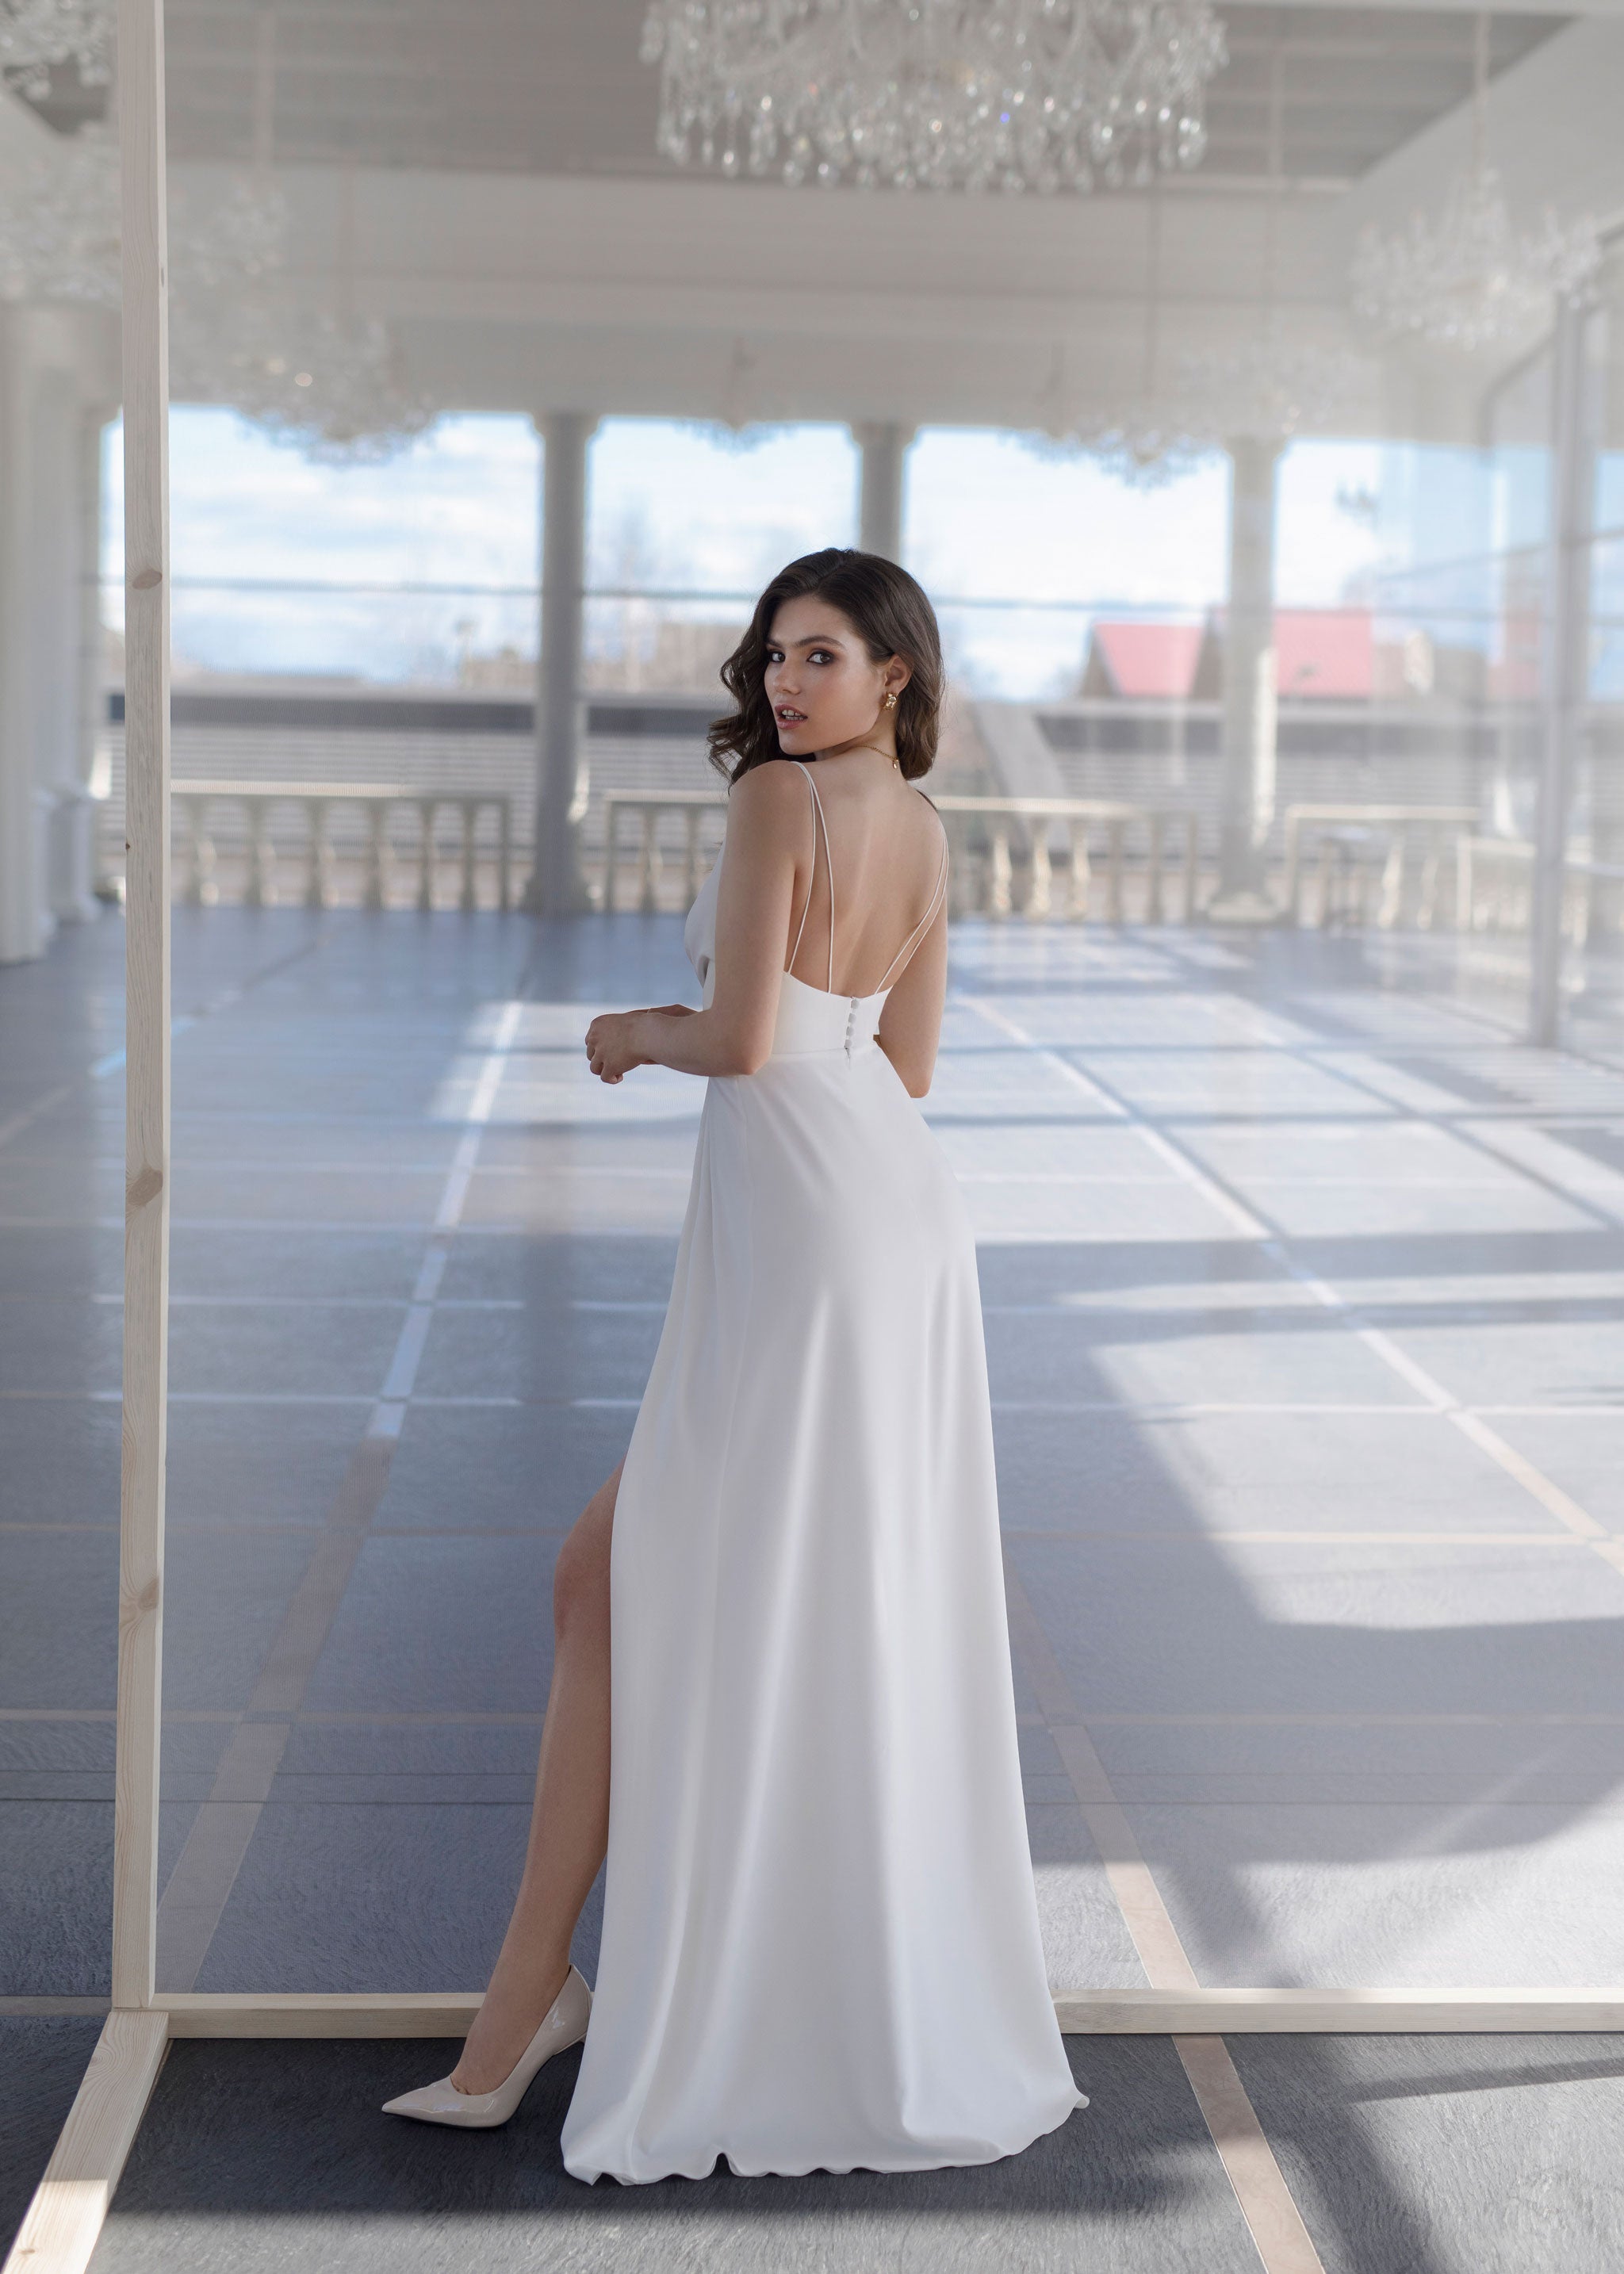 White chiffon dress online. Simple white A-line dress. Affordable bridal gown online. Modern wedding dresses online.